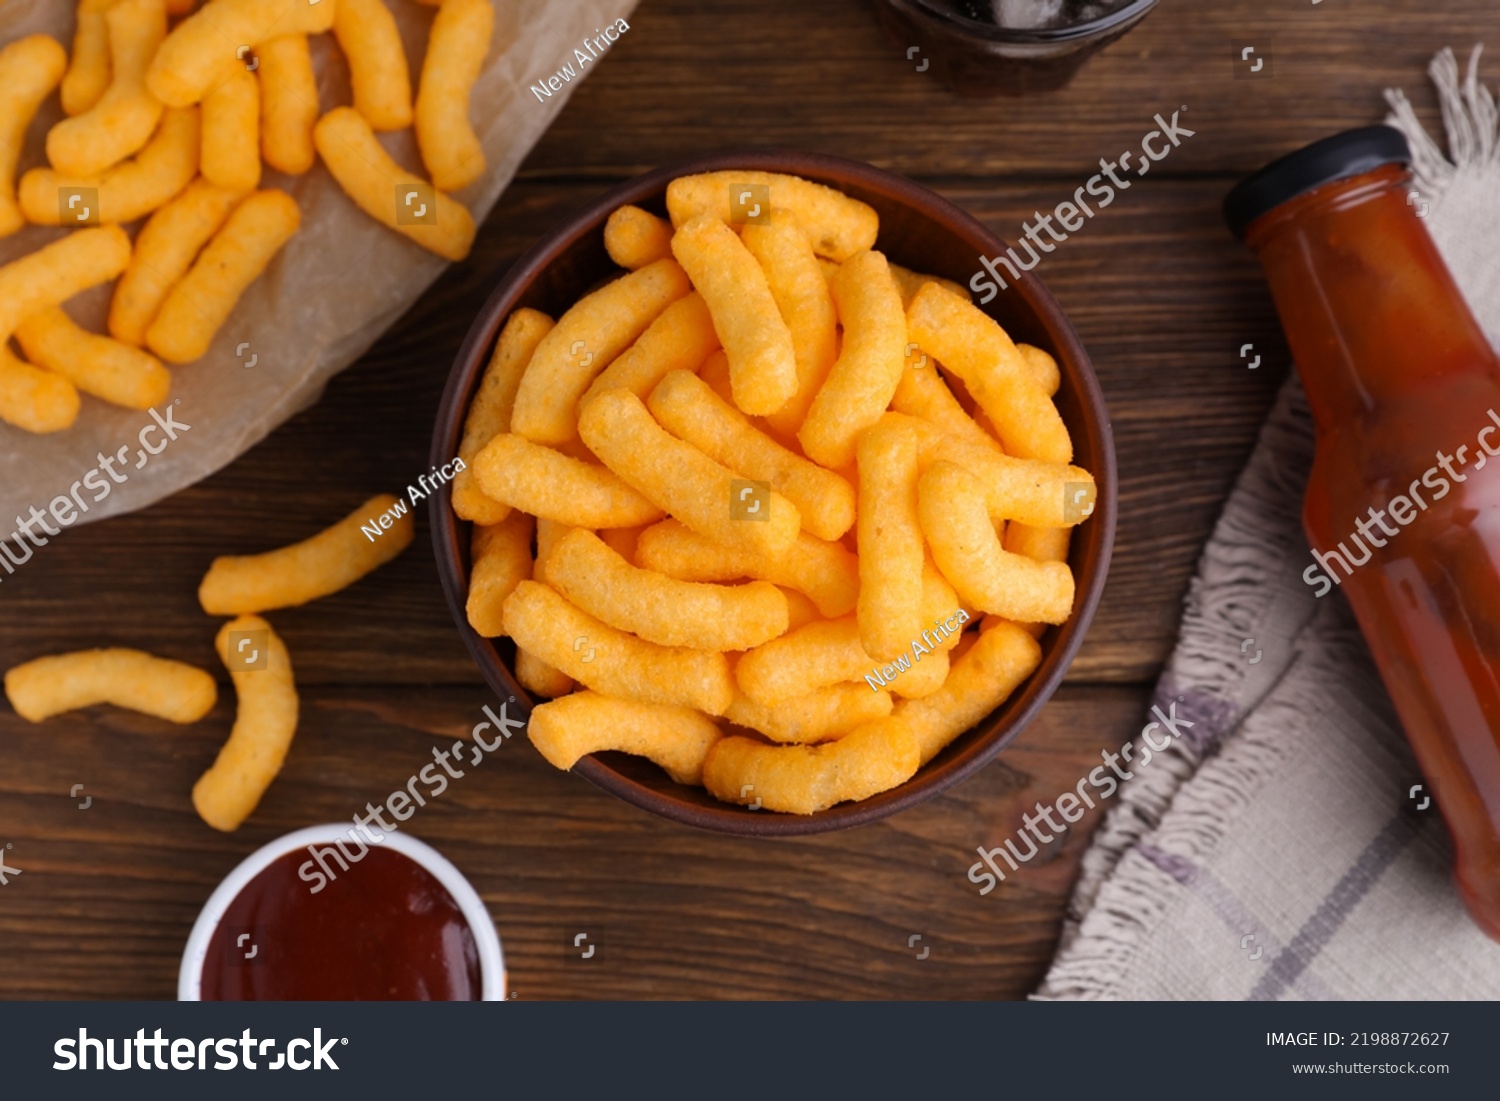 Crunchy cheesy corn snack and ketchup on wooden table, flat lay #2198872627